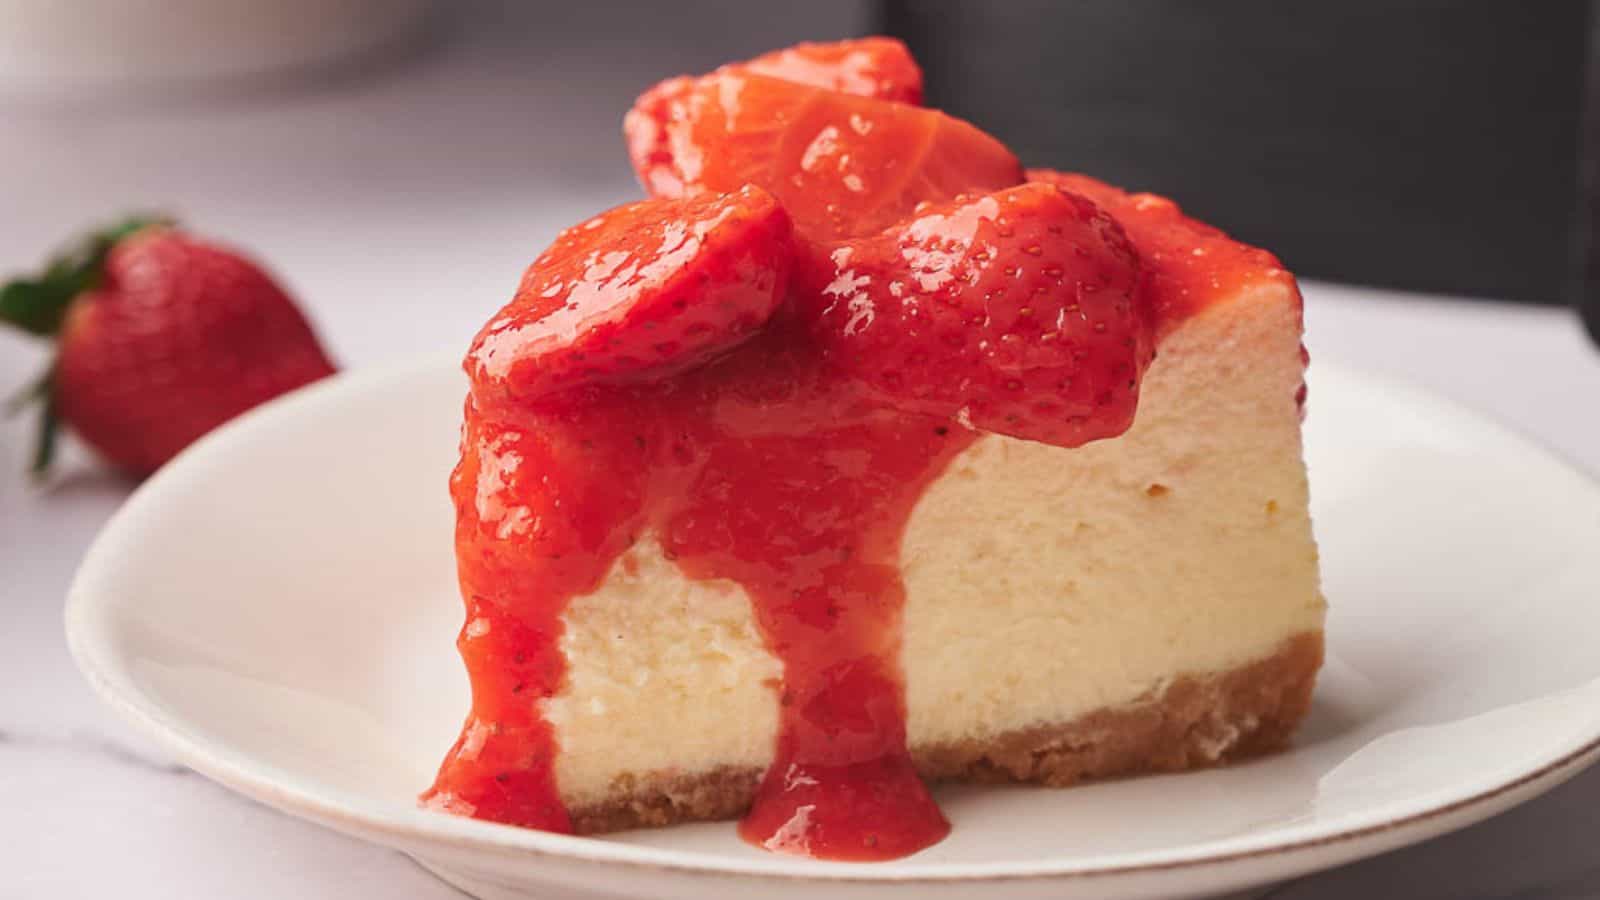 <p>Offering another dessert option, Air Fryer Strawberry Cheesecake allows you to enjoy a classic dish without the lengthy preparation. It’s a straightforward approach to a crowd-pleasing dessert.<br><strong>Get the Recipe: </strong><a href="https://www.splashoftaste.com/air-fryer-strawberry-cheesecake/?utm_source=msn&utm_medium=page&utm_campaign=msn">Air Fryer Strawberry Cheesecake</a></p>